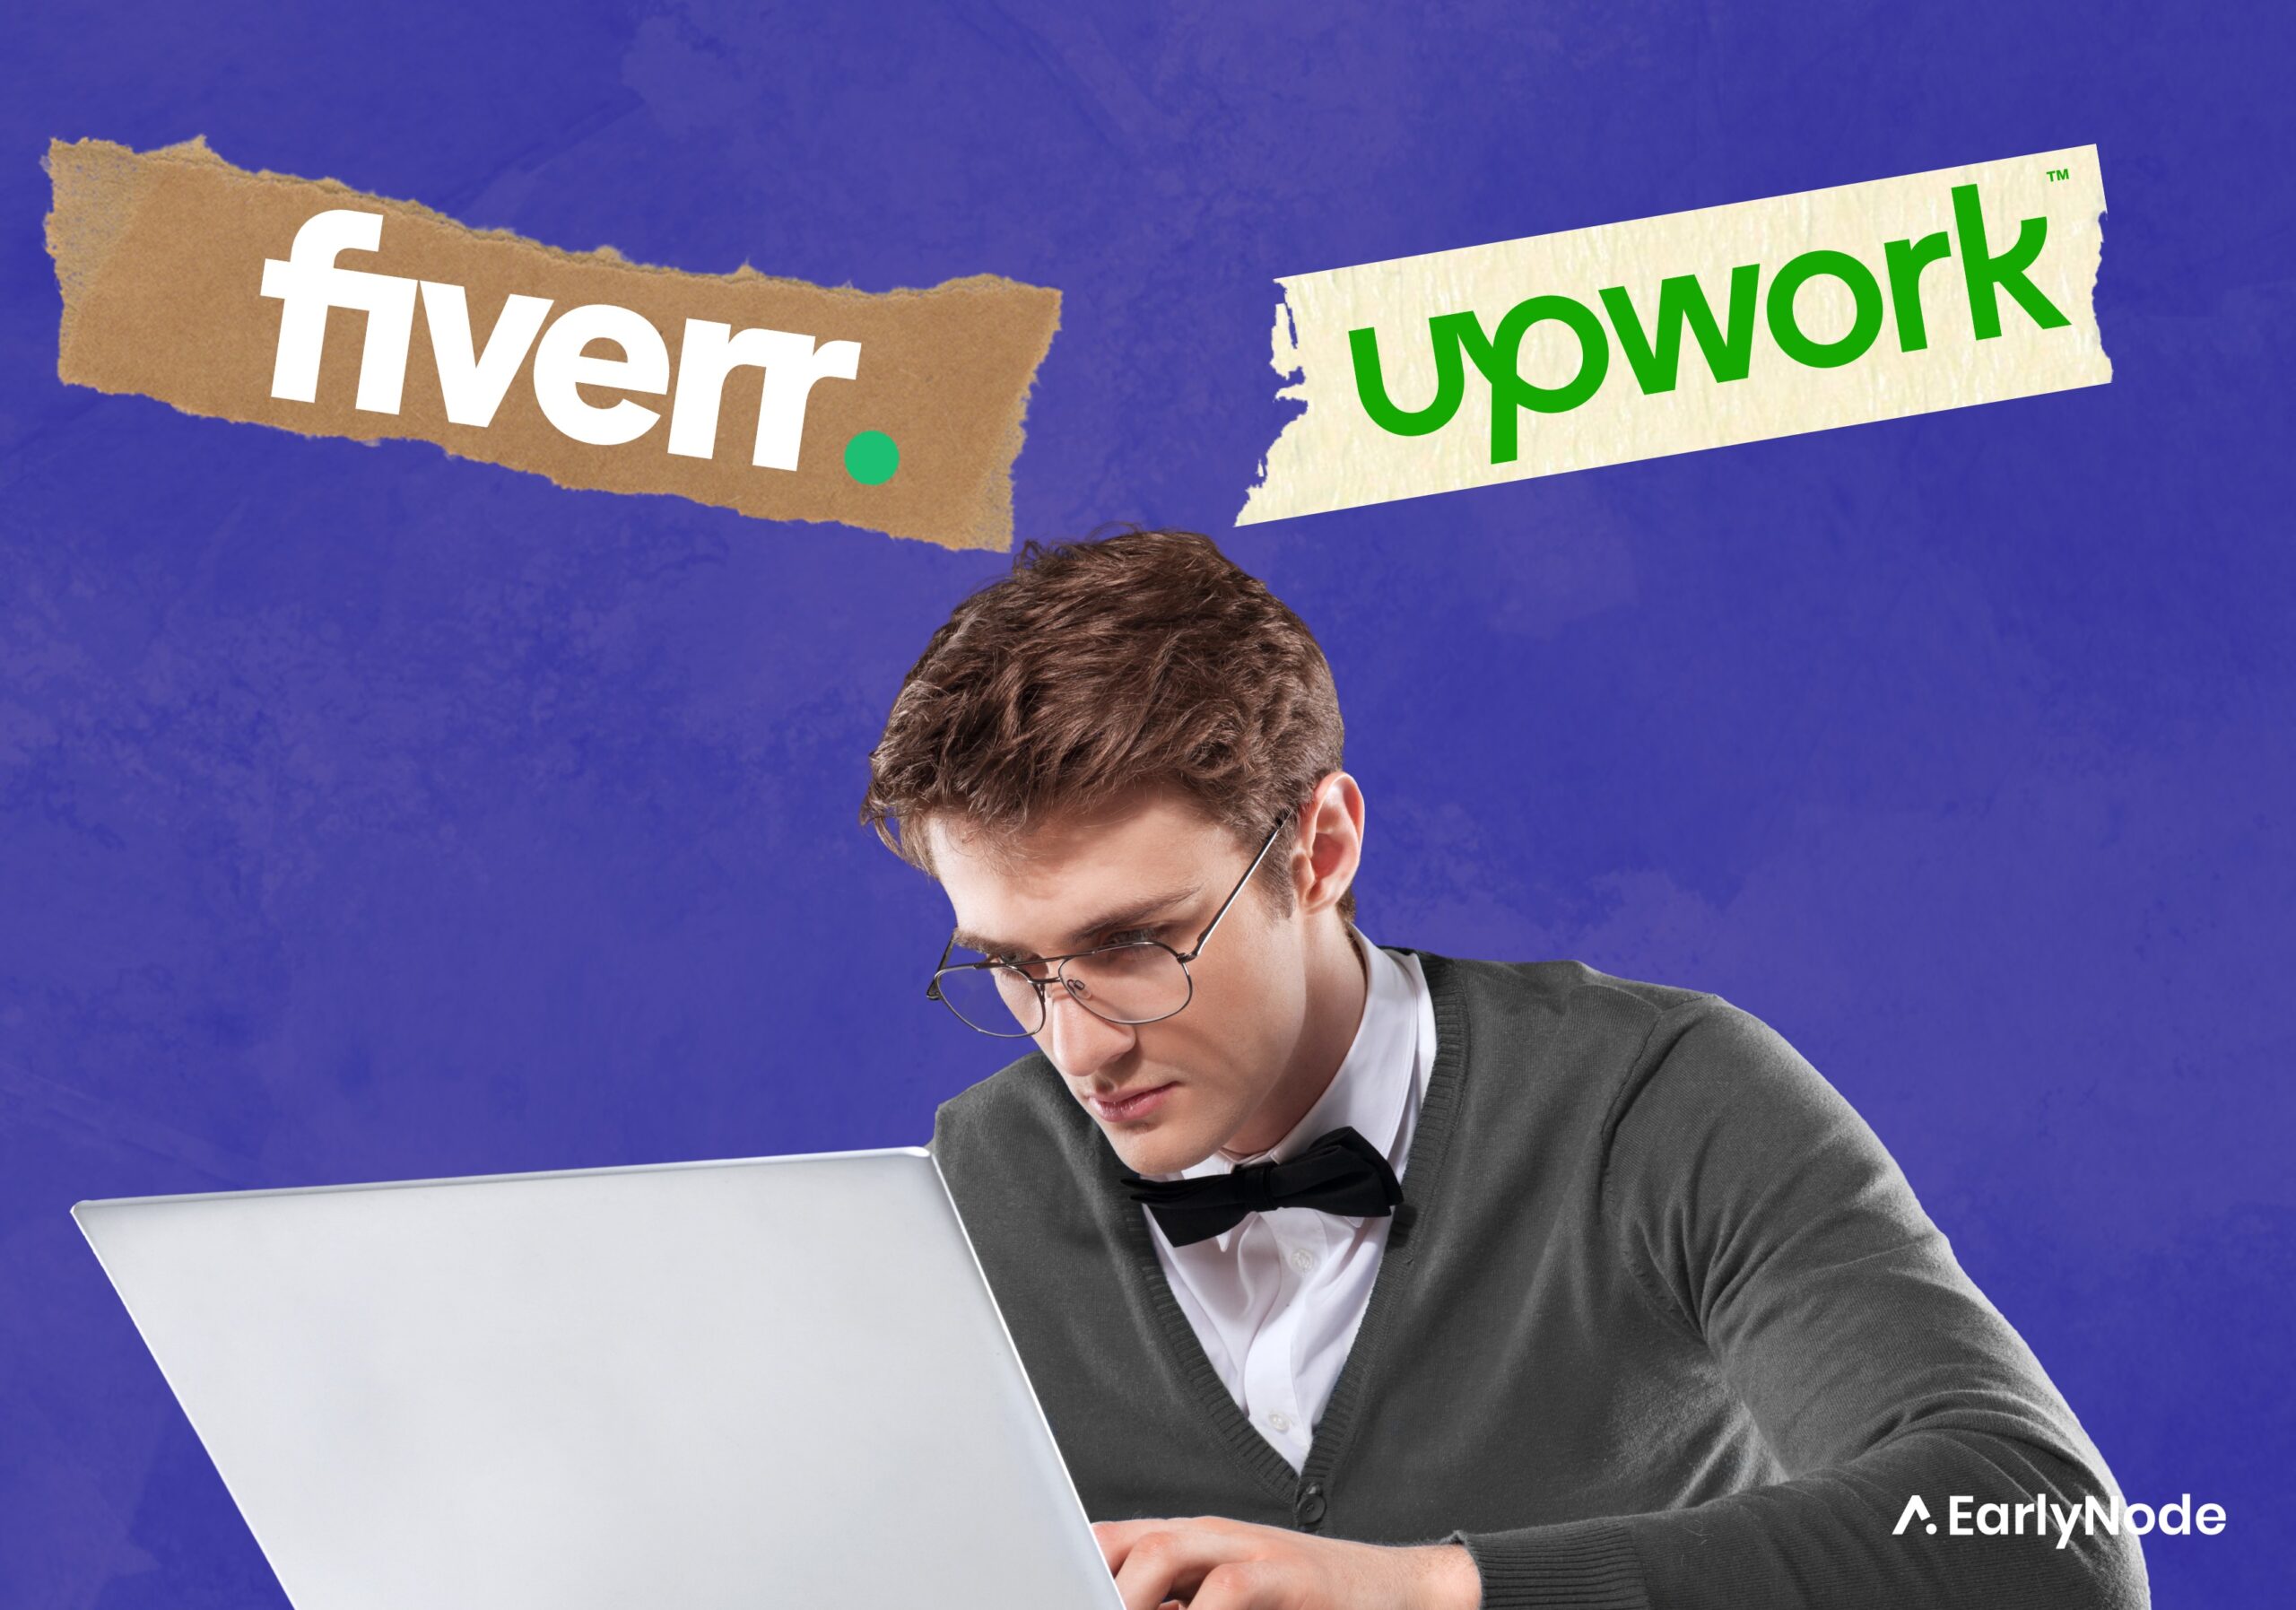 Fiverr vs Upwork: Which is Better for Hiring Software Developers